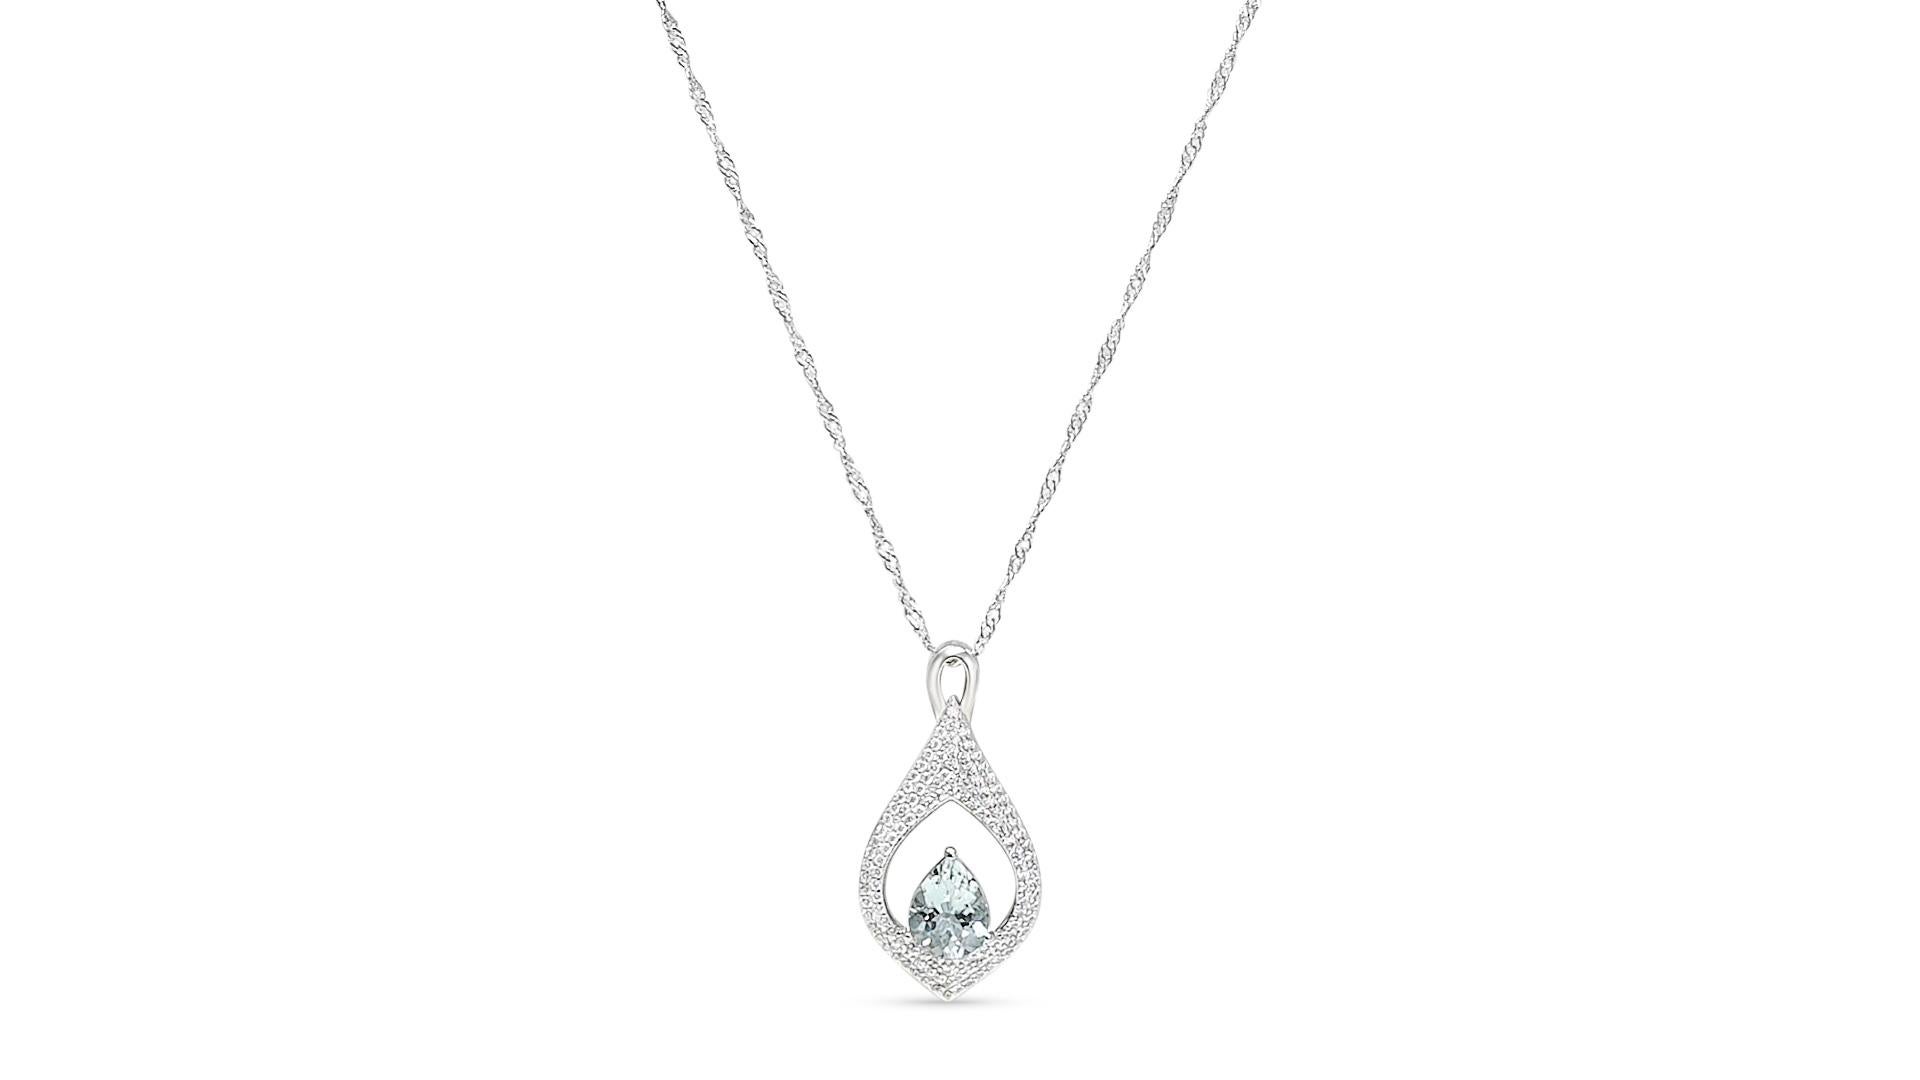 Art Deco Solid 925 Sterling Silver Bridal Aquamarine Wedding Pendant Necklace Gift Her For Sale